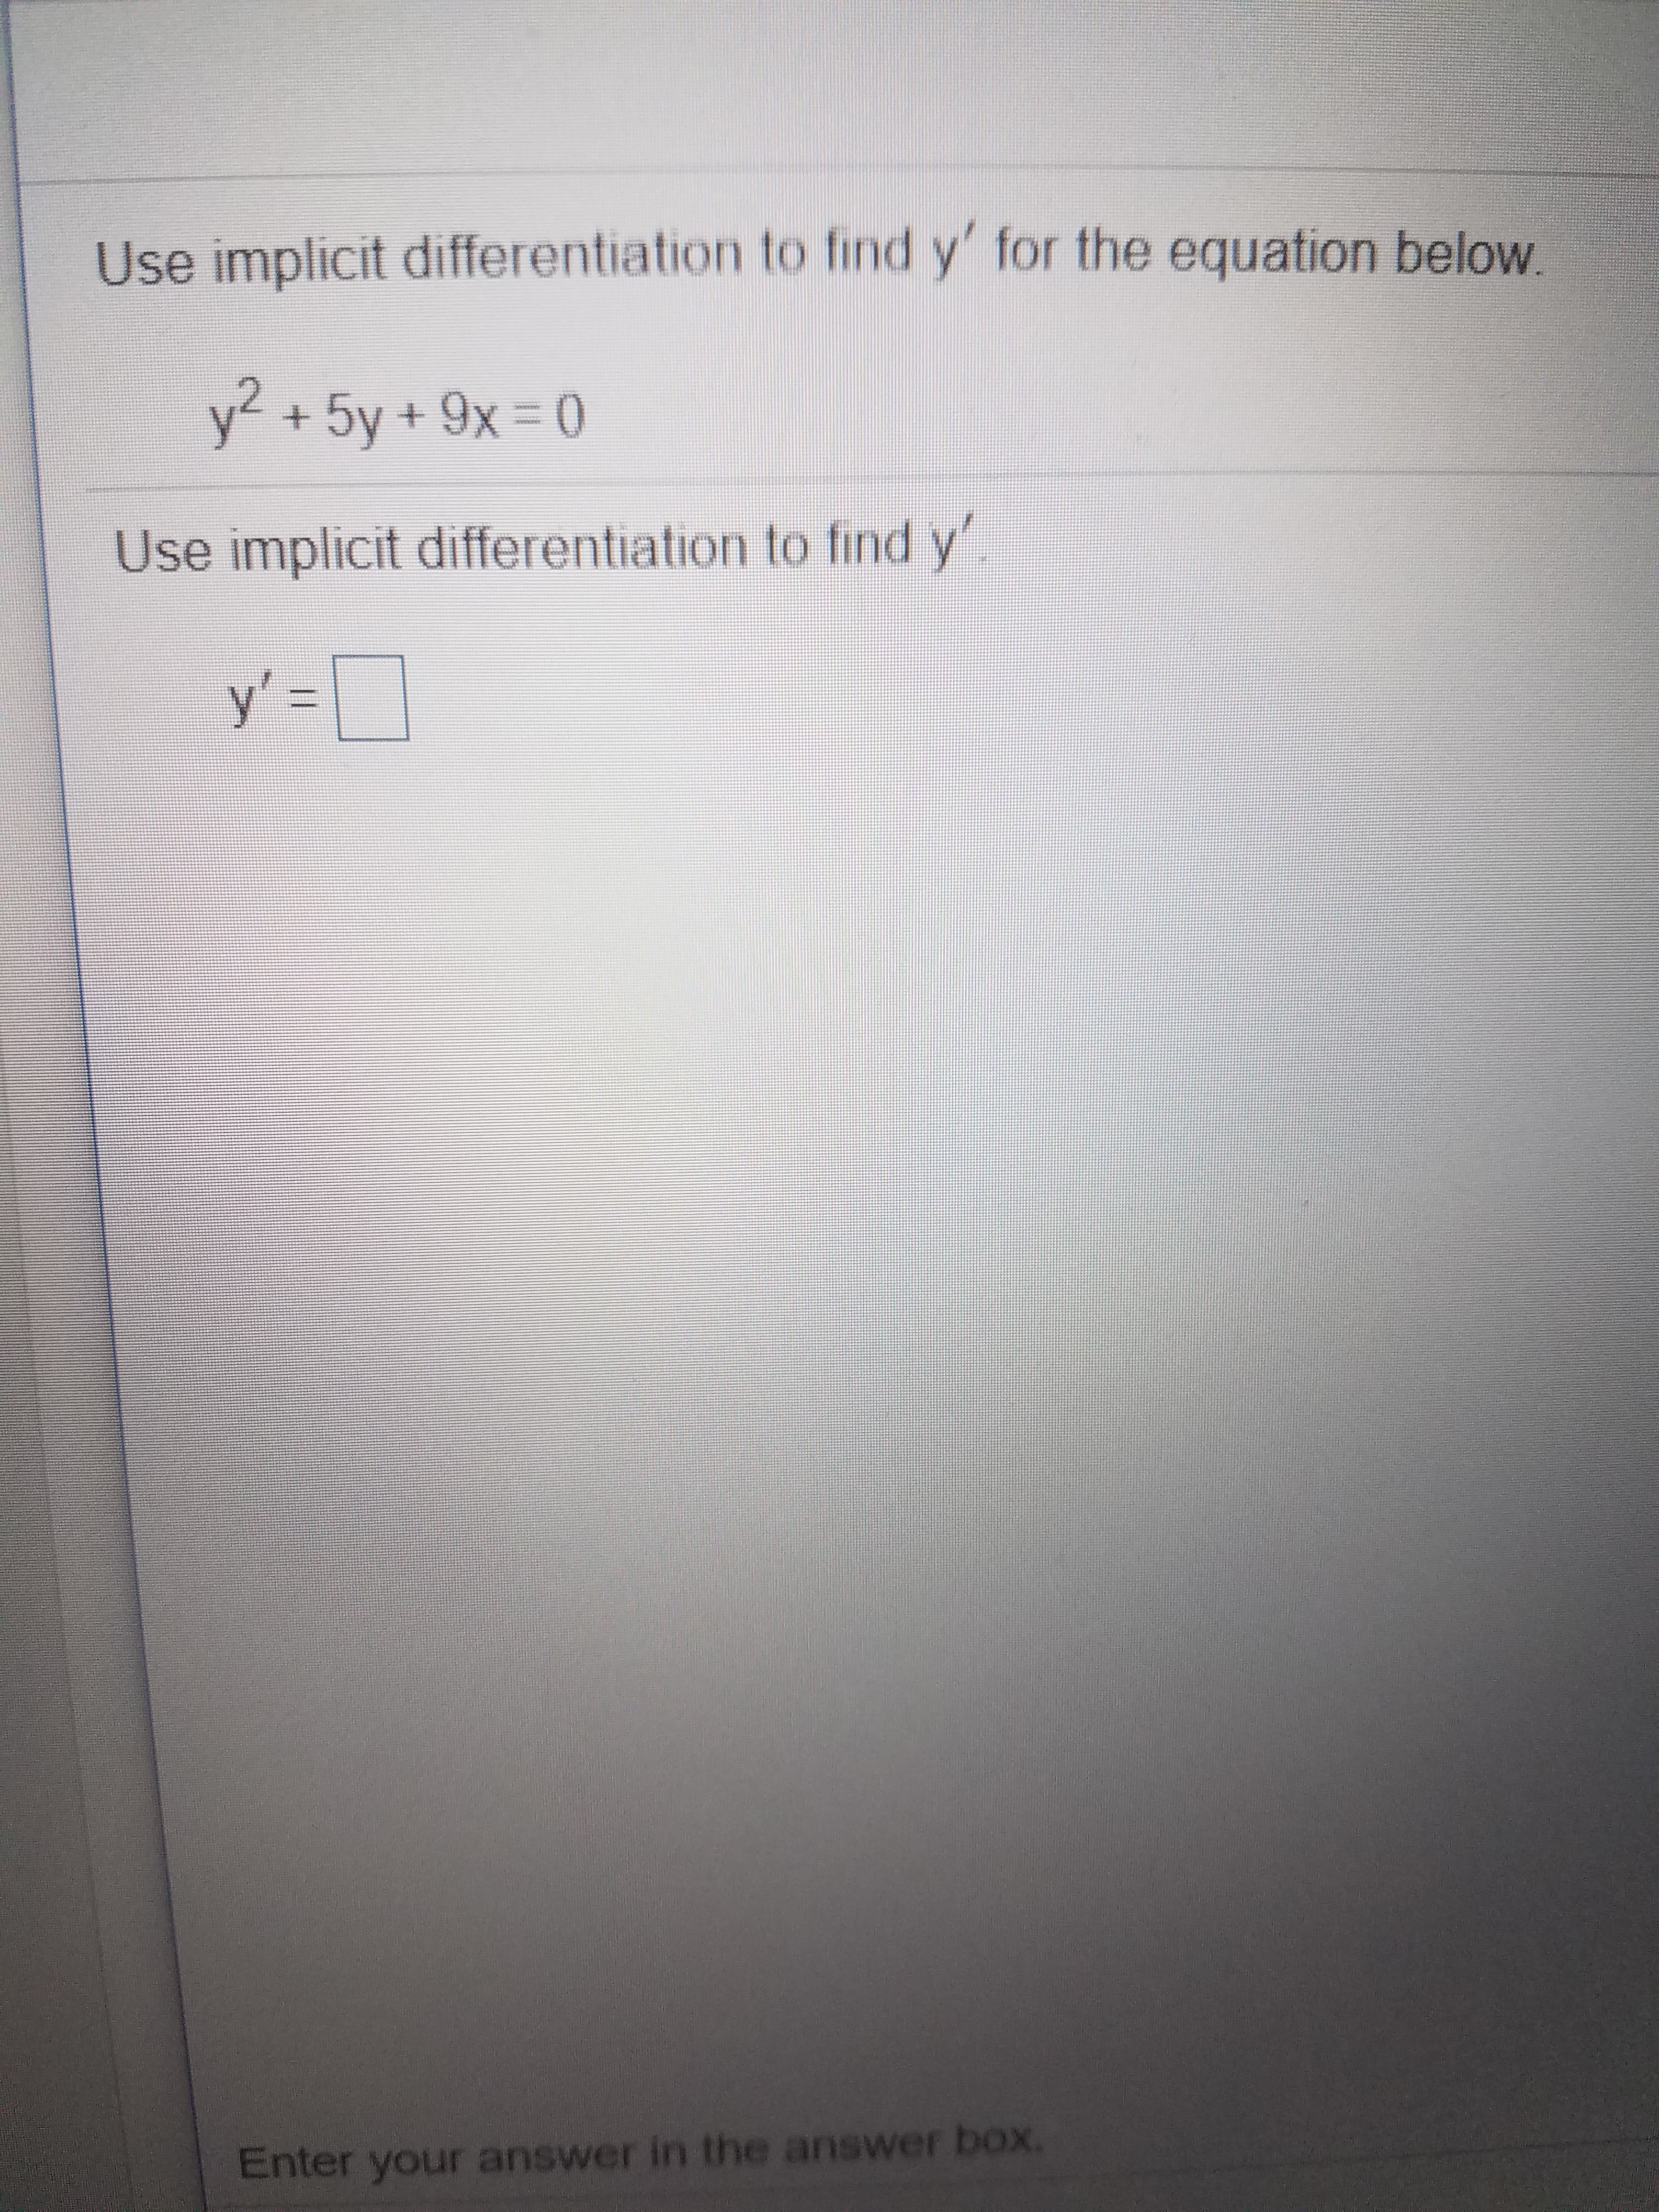 Use implicit differentiation to find y' for the equation below
y2 +5y+ 9x 0
Use implicit differentiation to find y'
y =
Enter your answer in the answer box.
